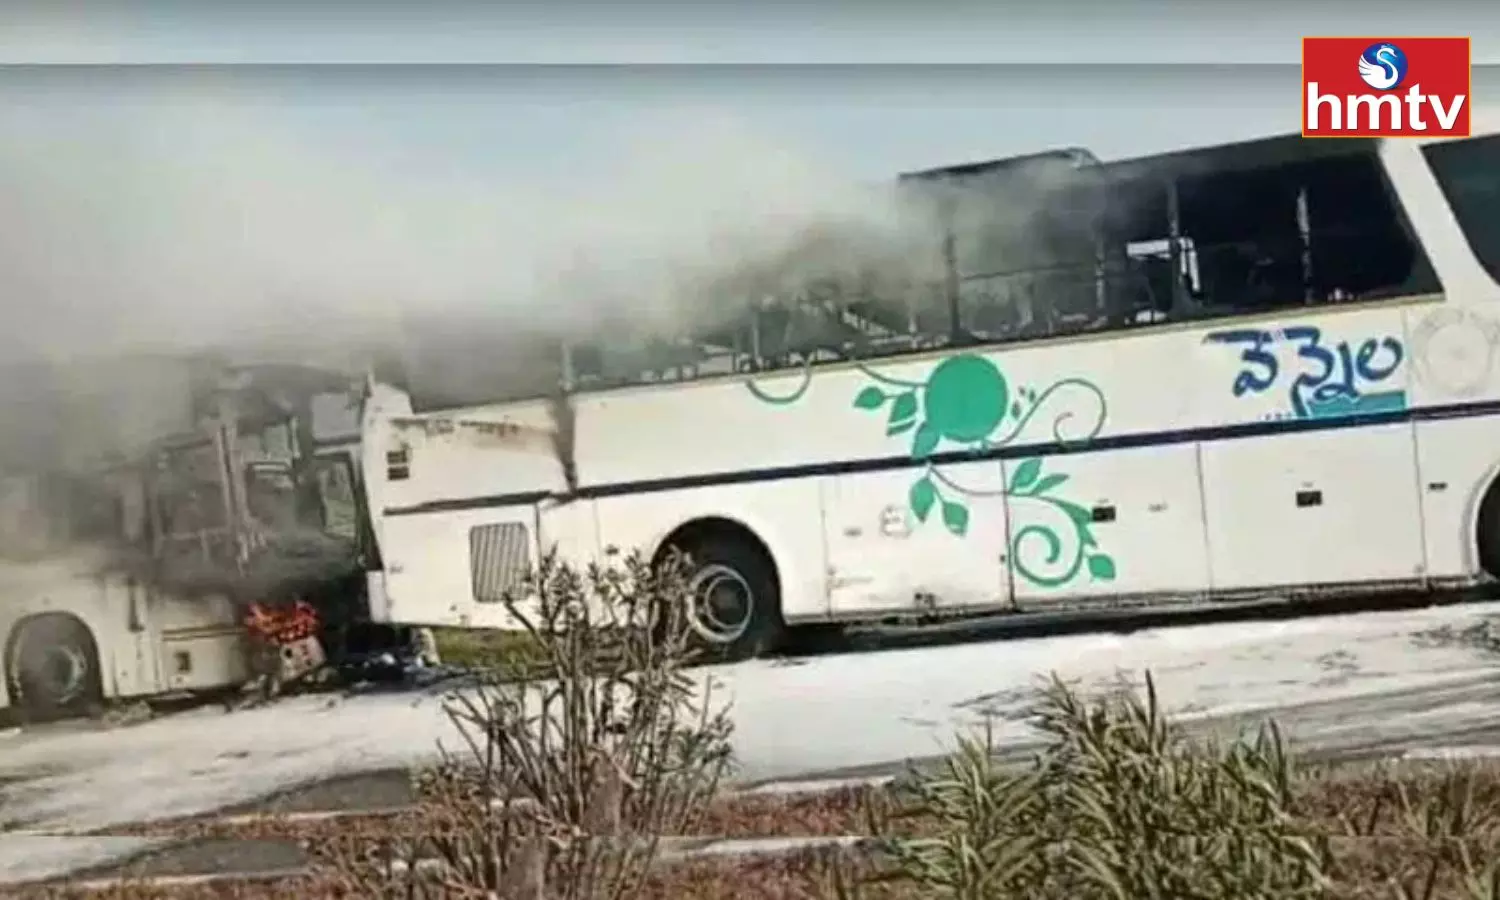 Two RTC Bus Catches Fire At Hyderabad Vijayawada Highway